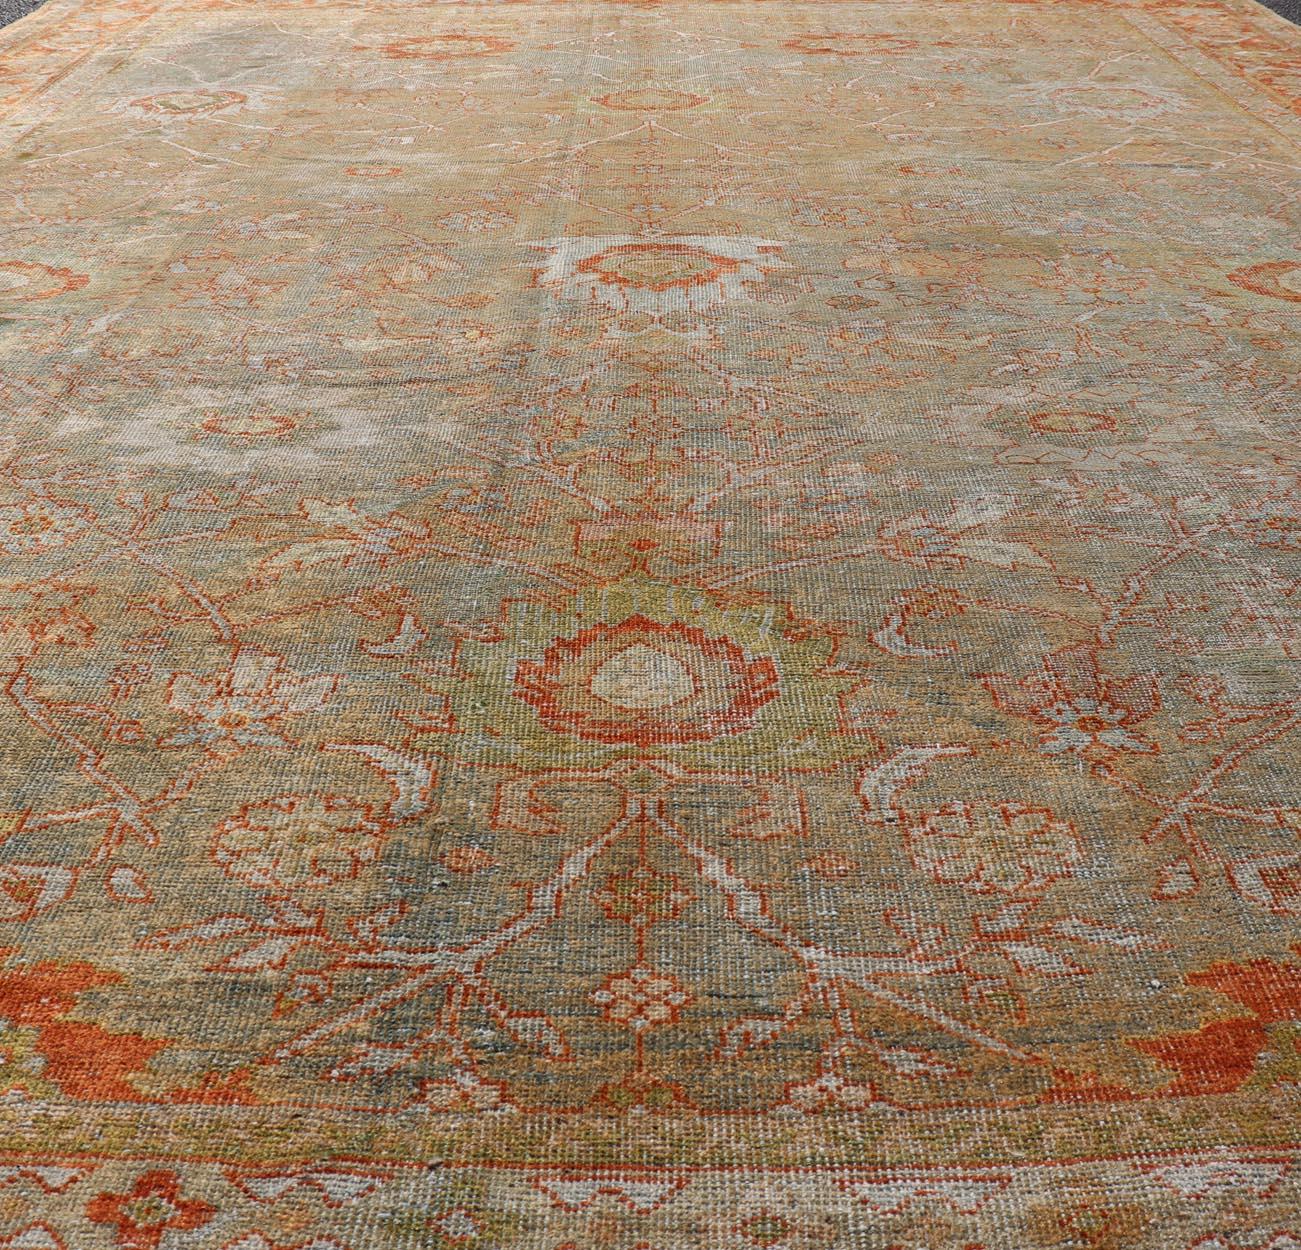 Antique Persian Distressed Sultanabad Rug in Light Green, Lt. Blue, Green, Red. Keivan Woven Arts / rug W22-0406-15480, country of origin / type: Iran / Sultanabad, circa 1900. 
Measures: 8'8 x 12'2 
This beautiful distressed antique Persian